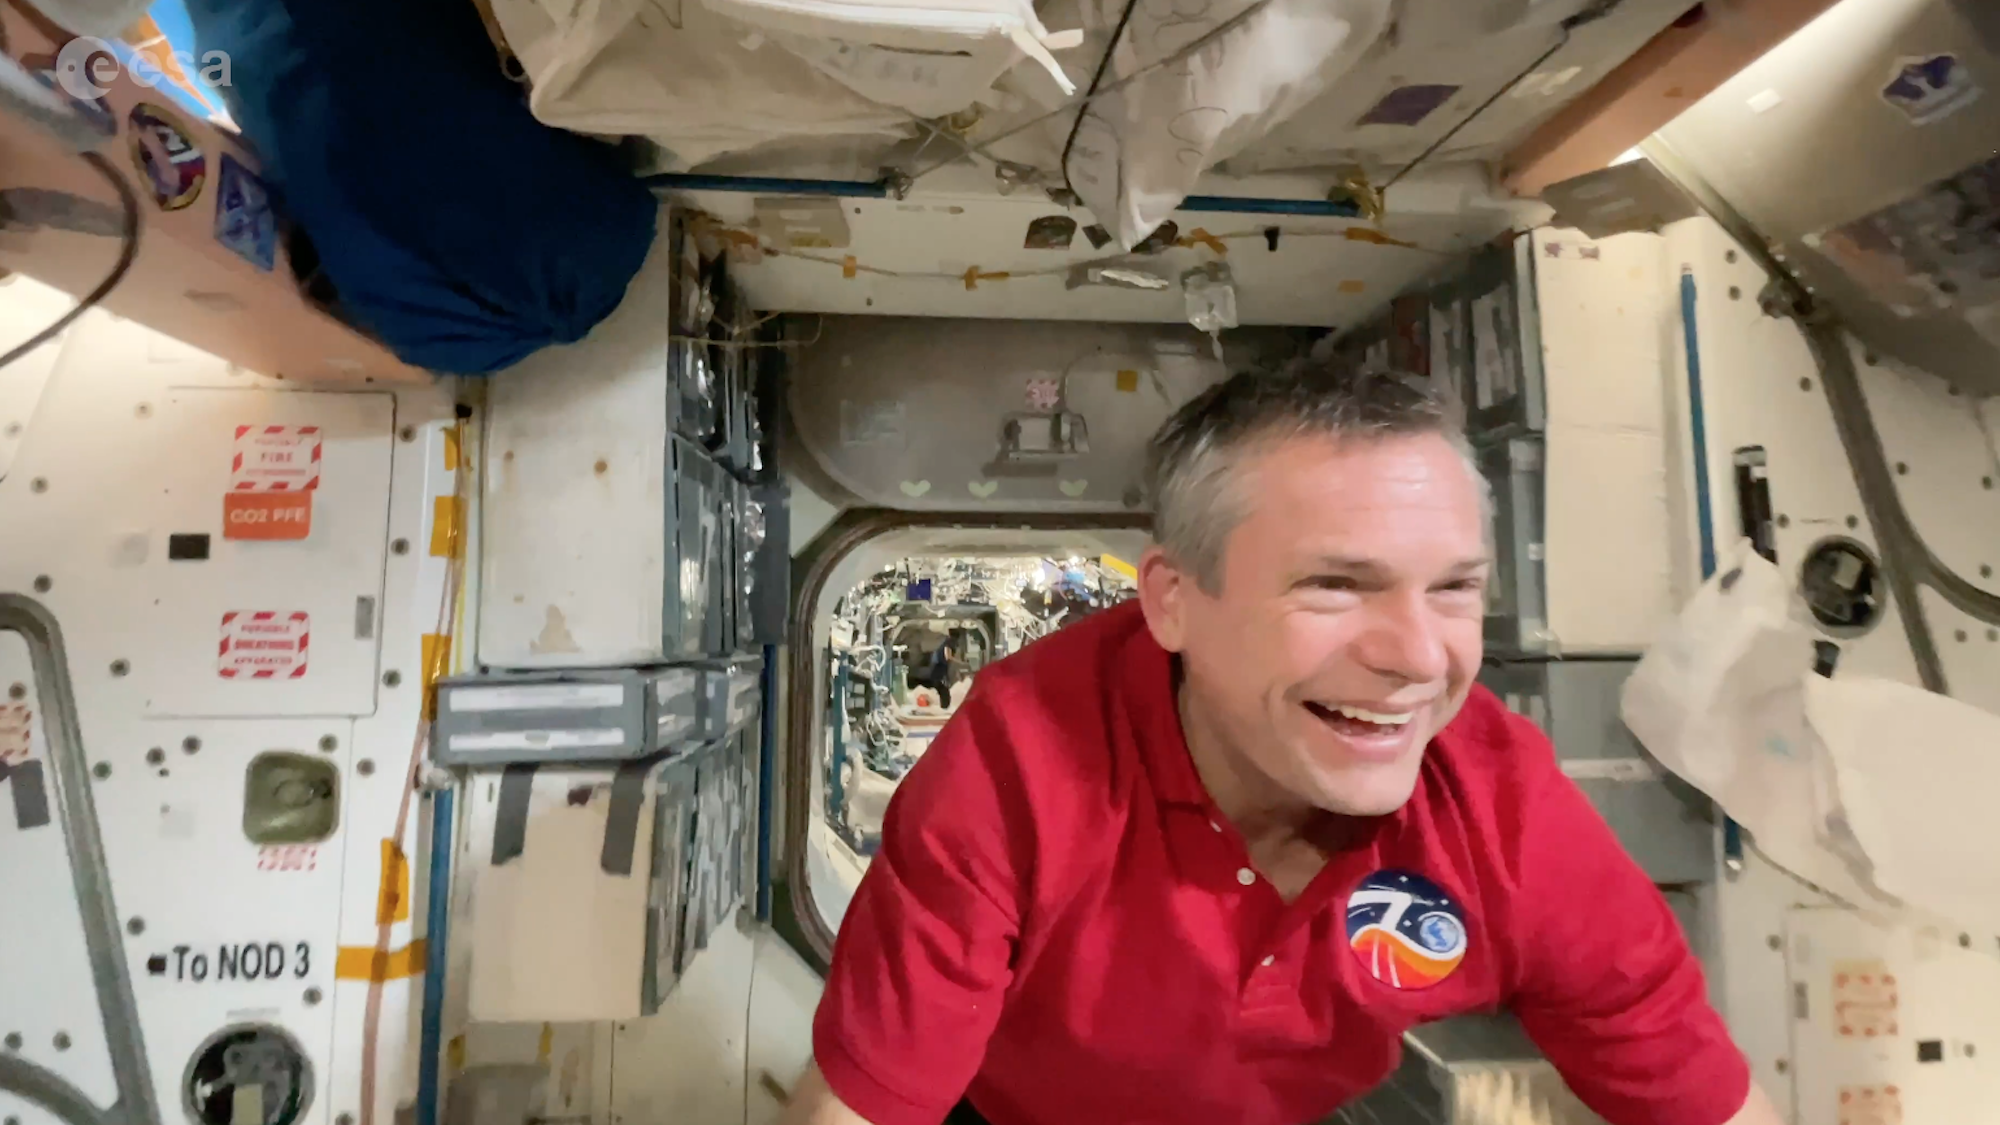 Astronaut Andreas Mogensen aboard the ISS